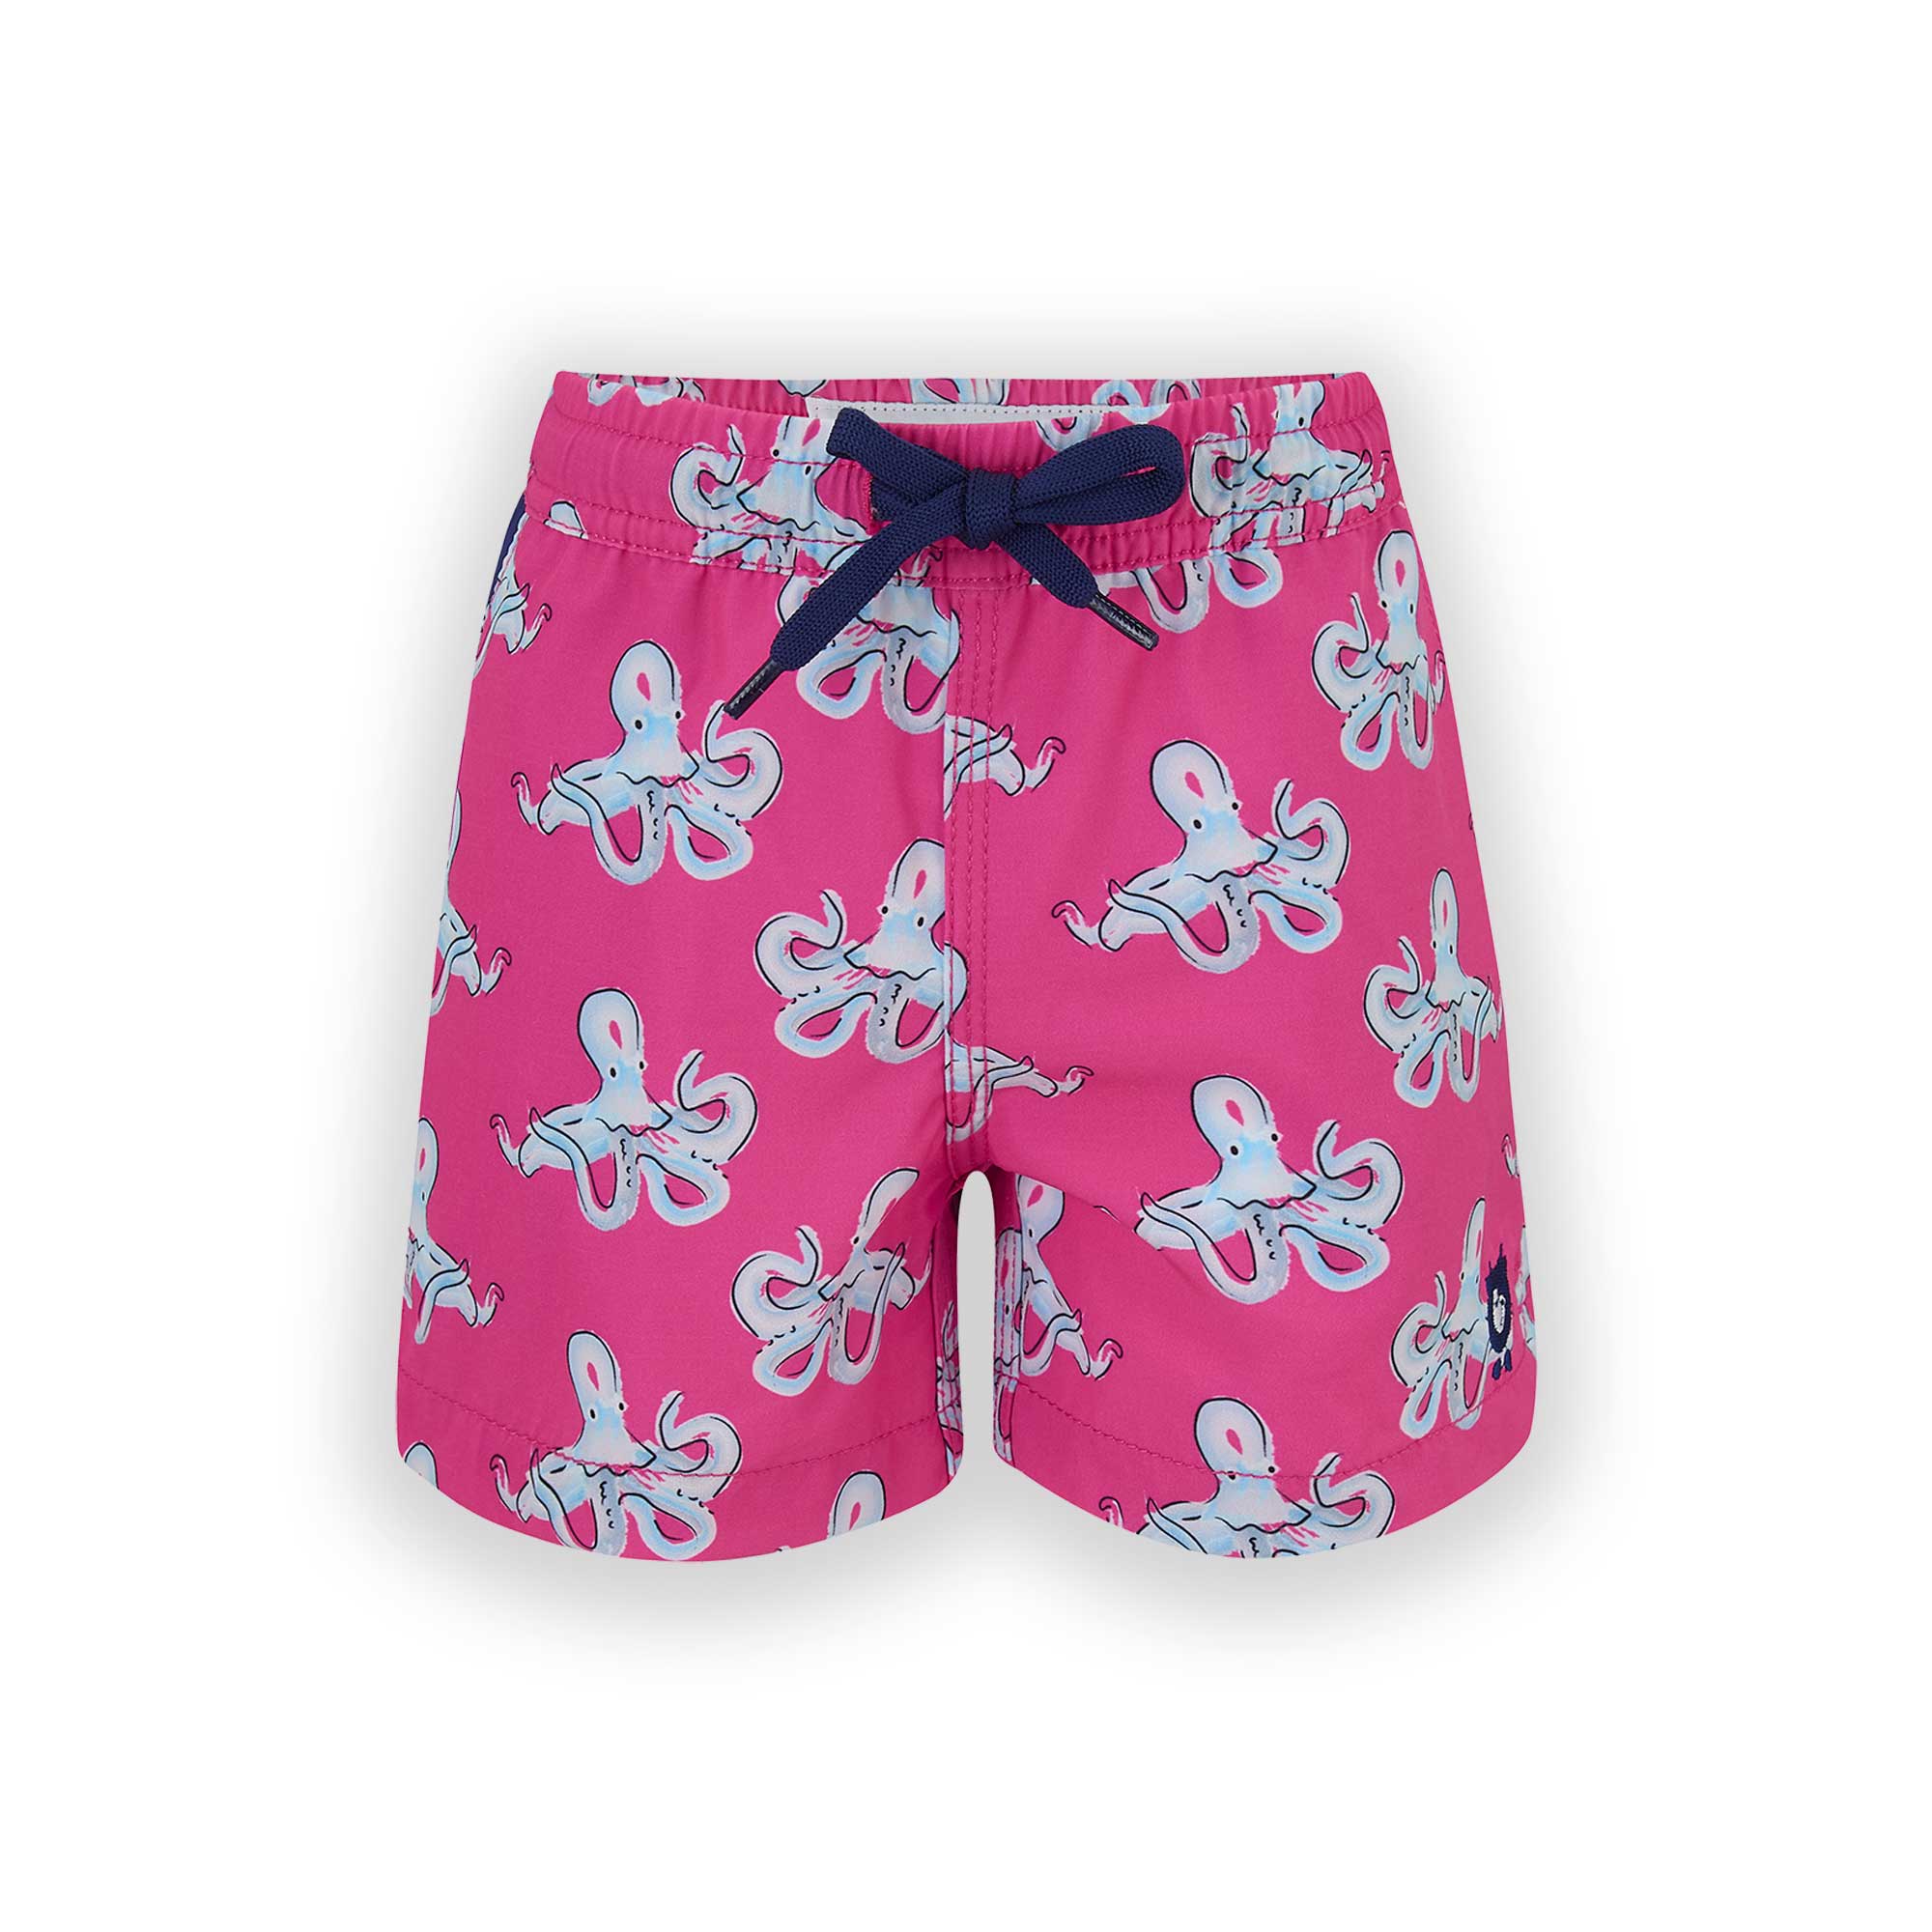 Matching Father & Son Octopus Swim Shorts with Waterproof Pocket